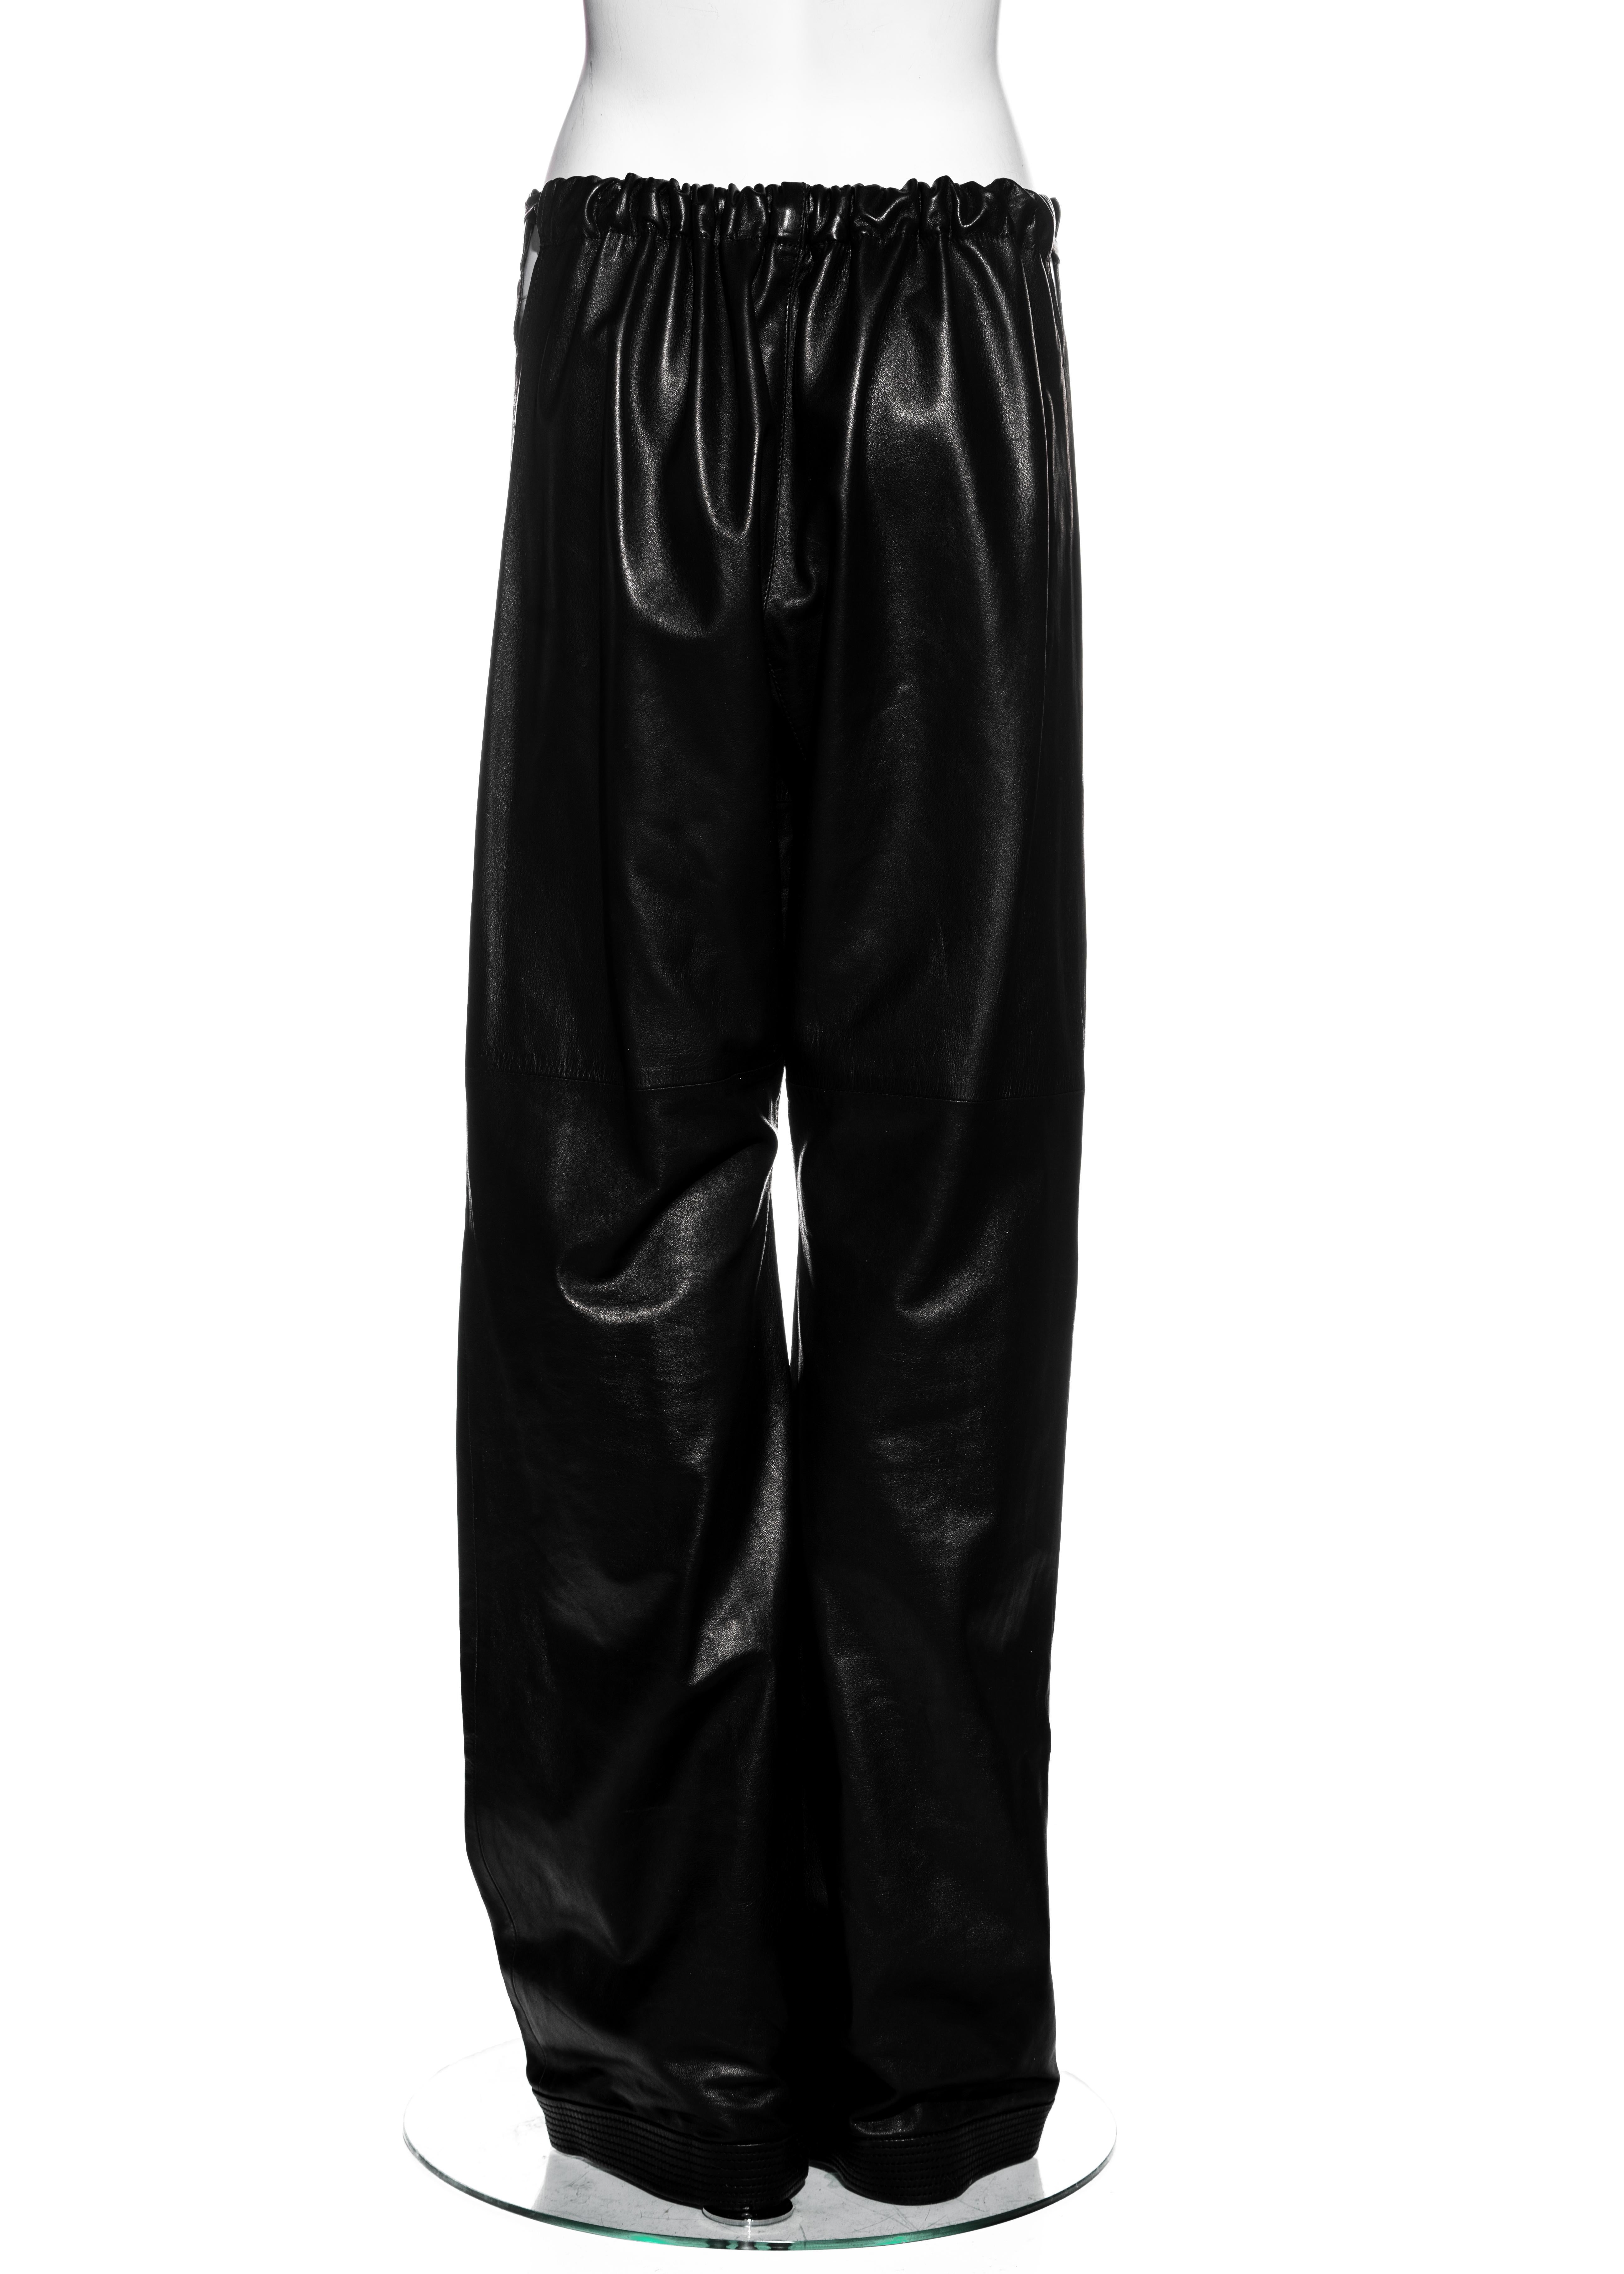 Gucci by Tom Ford unisex black lambskin leather wide-leg pants, ss 2001 1